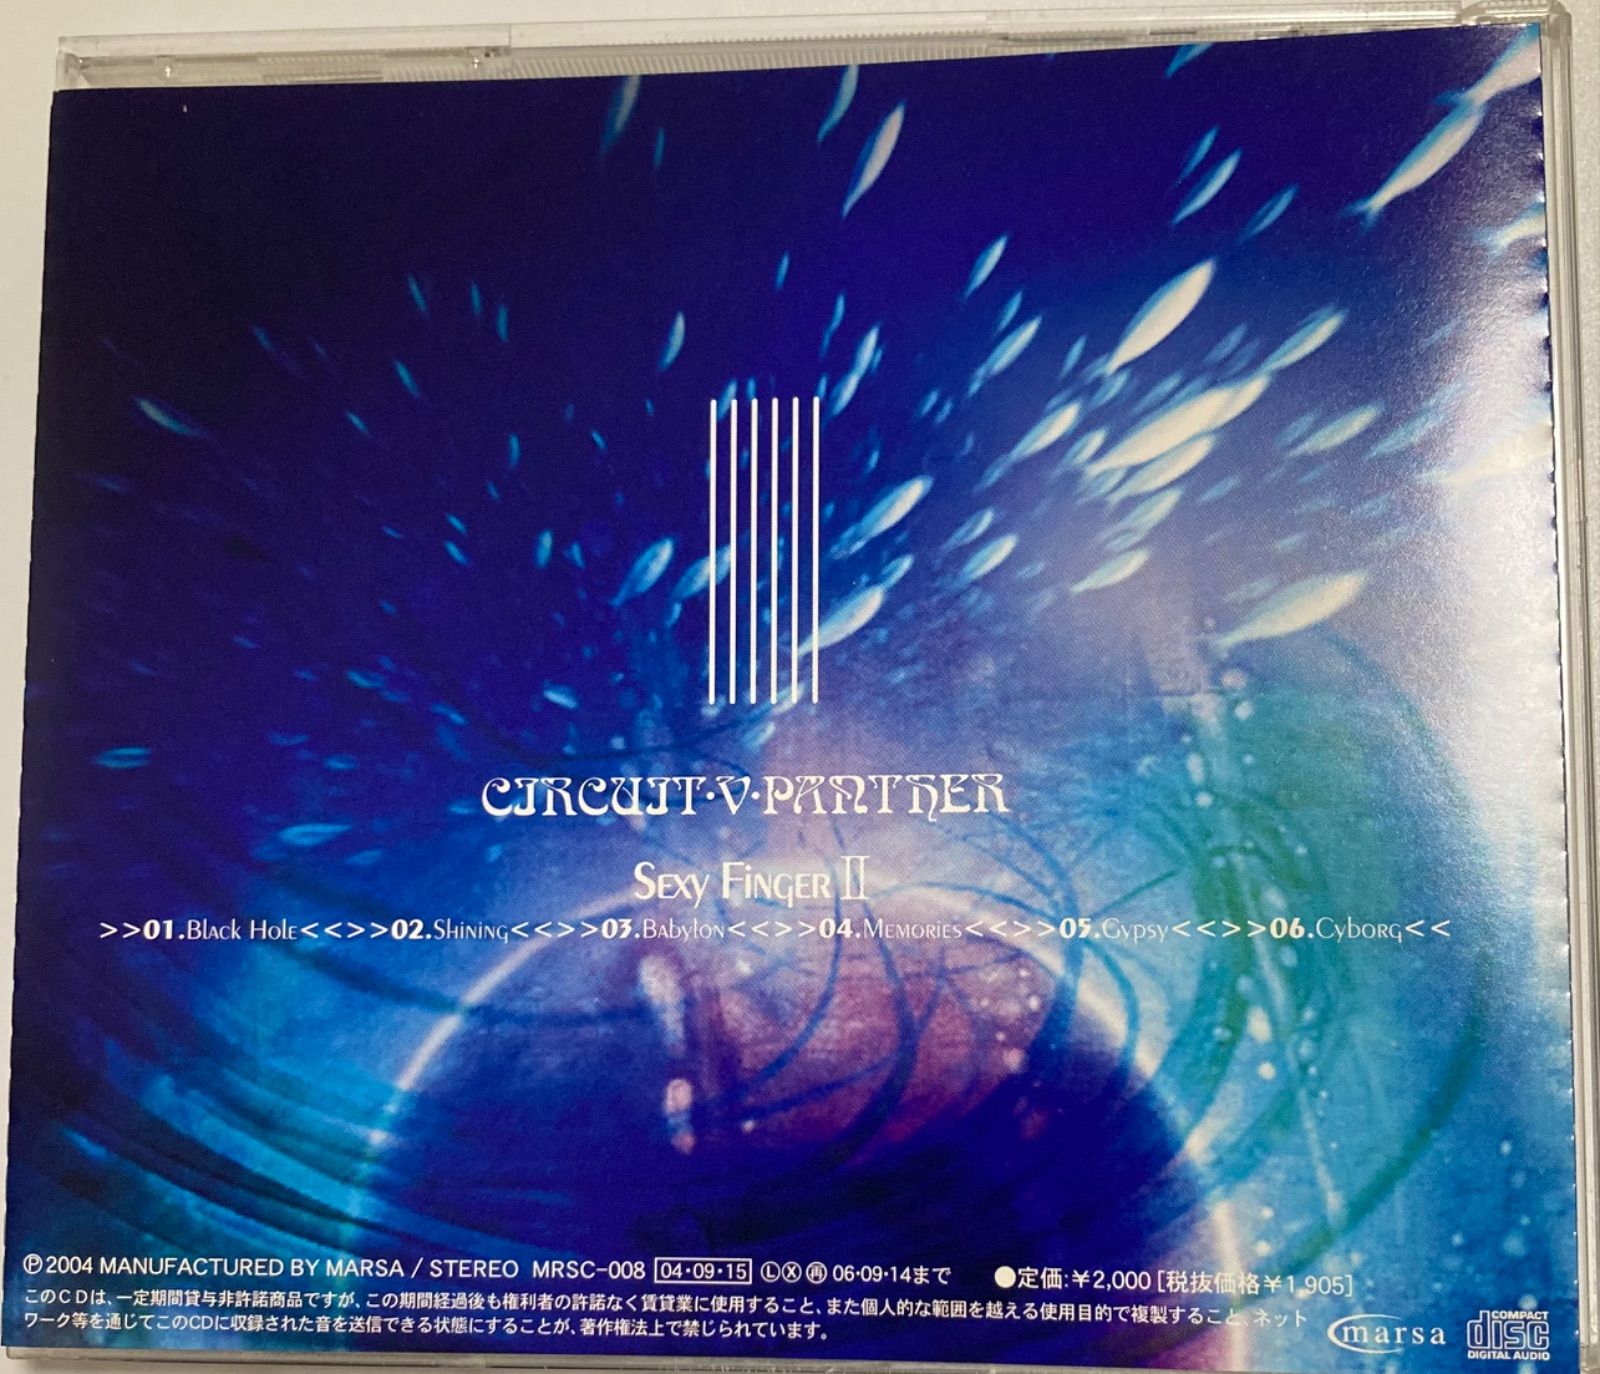 CIRCUIT V PANTHER SEXY FINGER Ⅱ